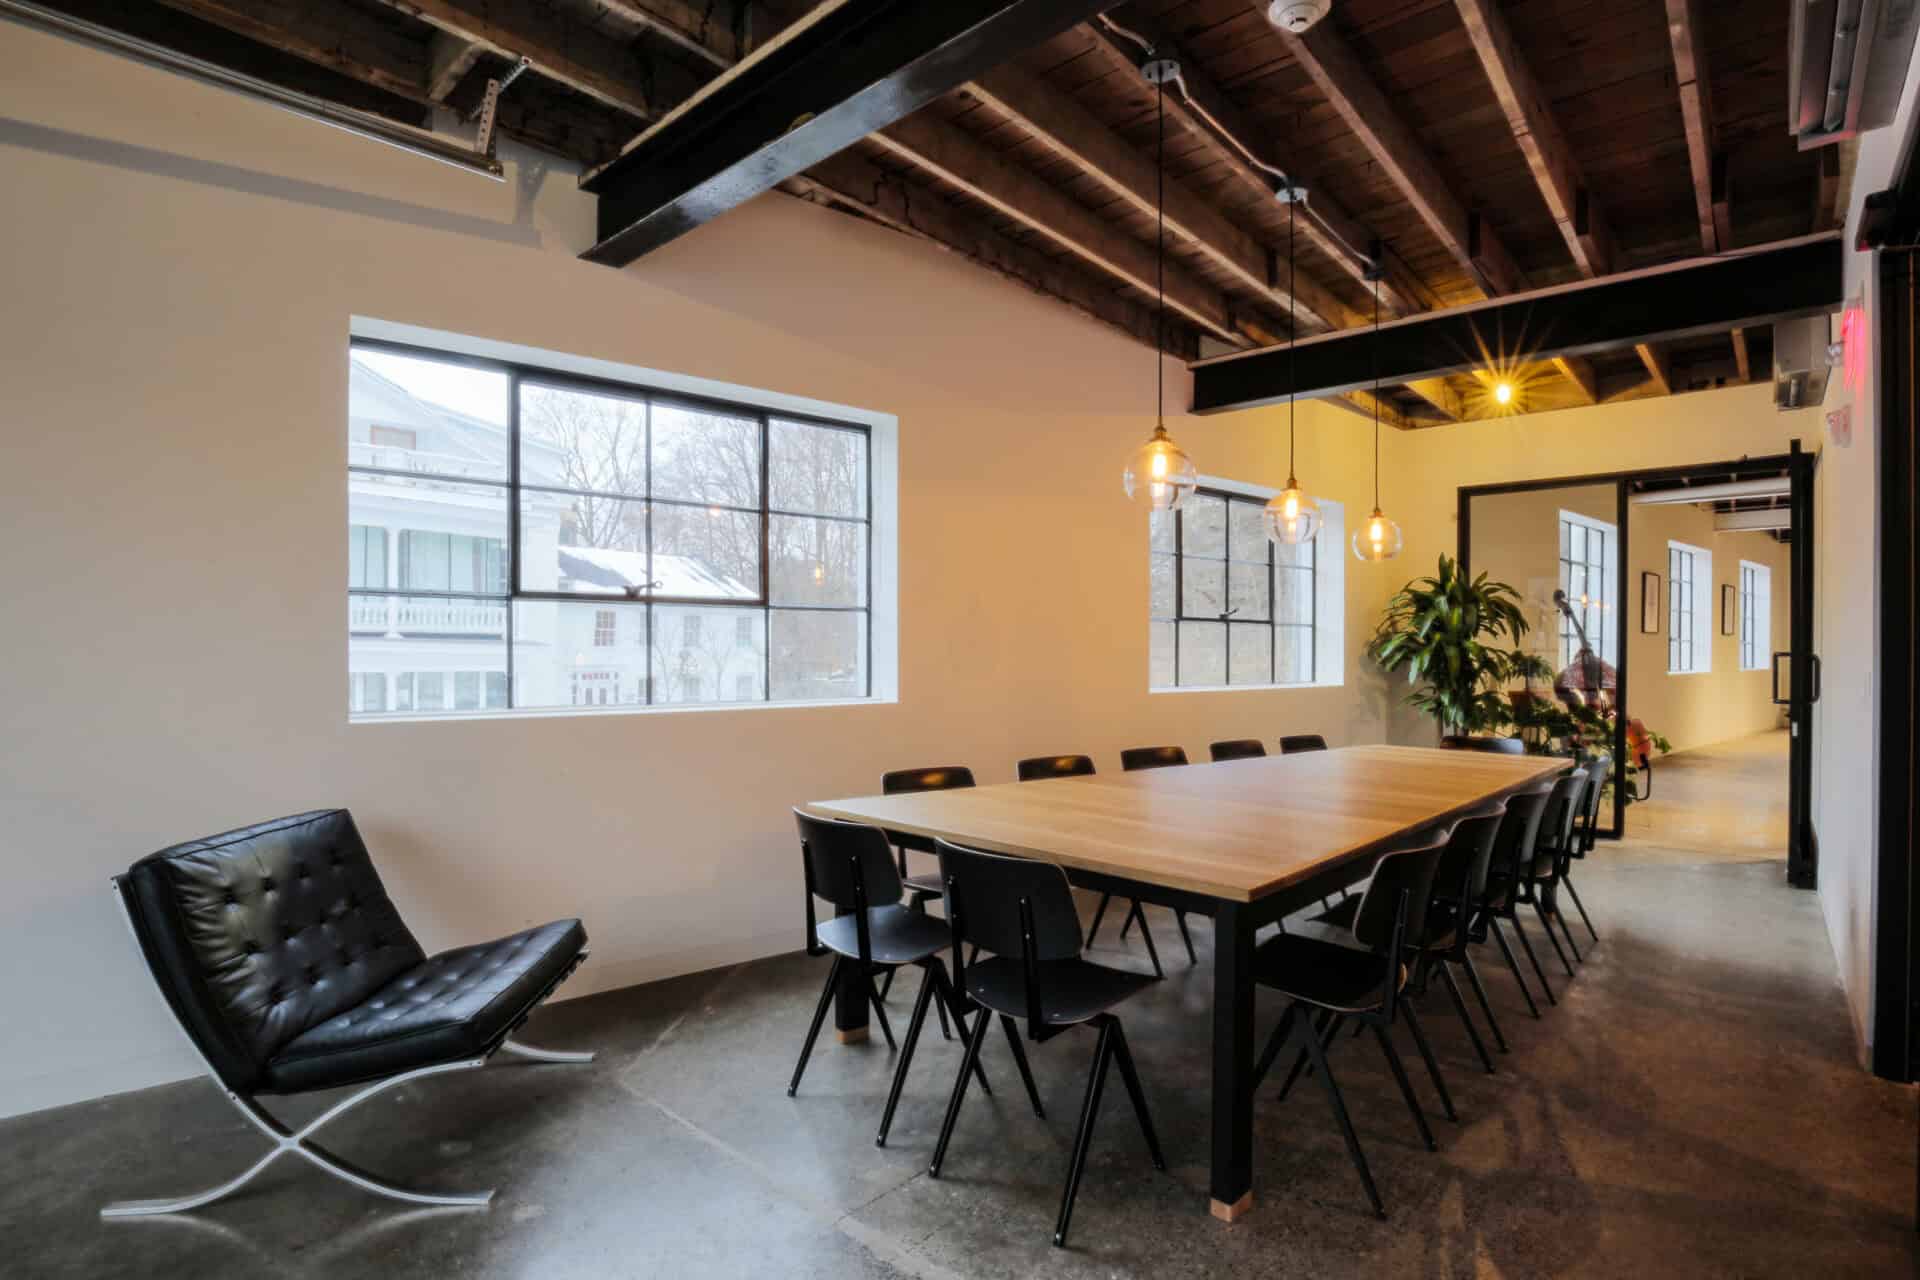 Photo of the Foundry conference room where we host live events and client meetings.